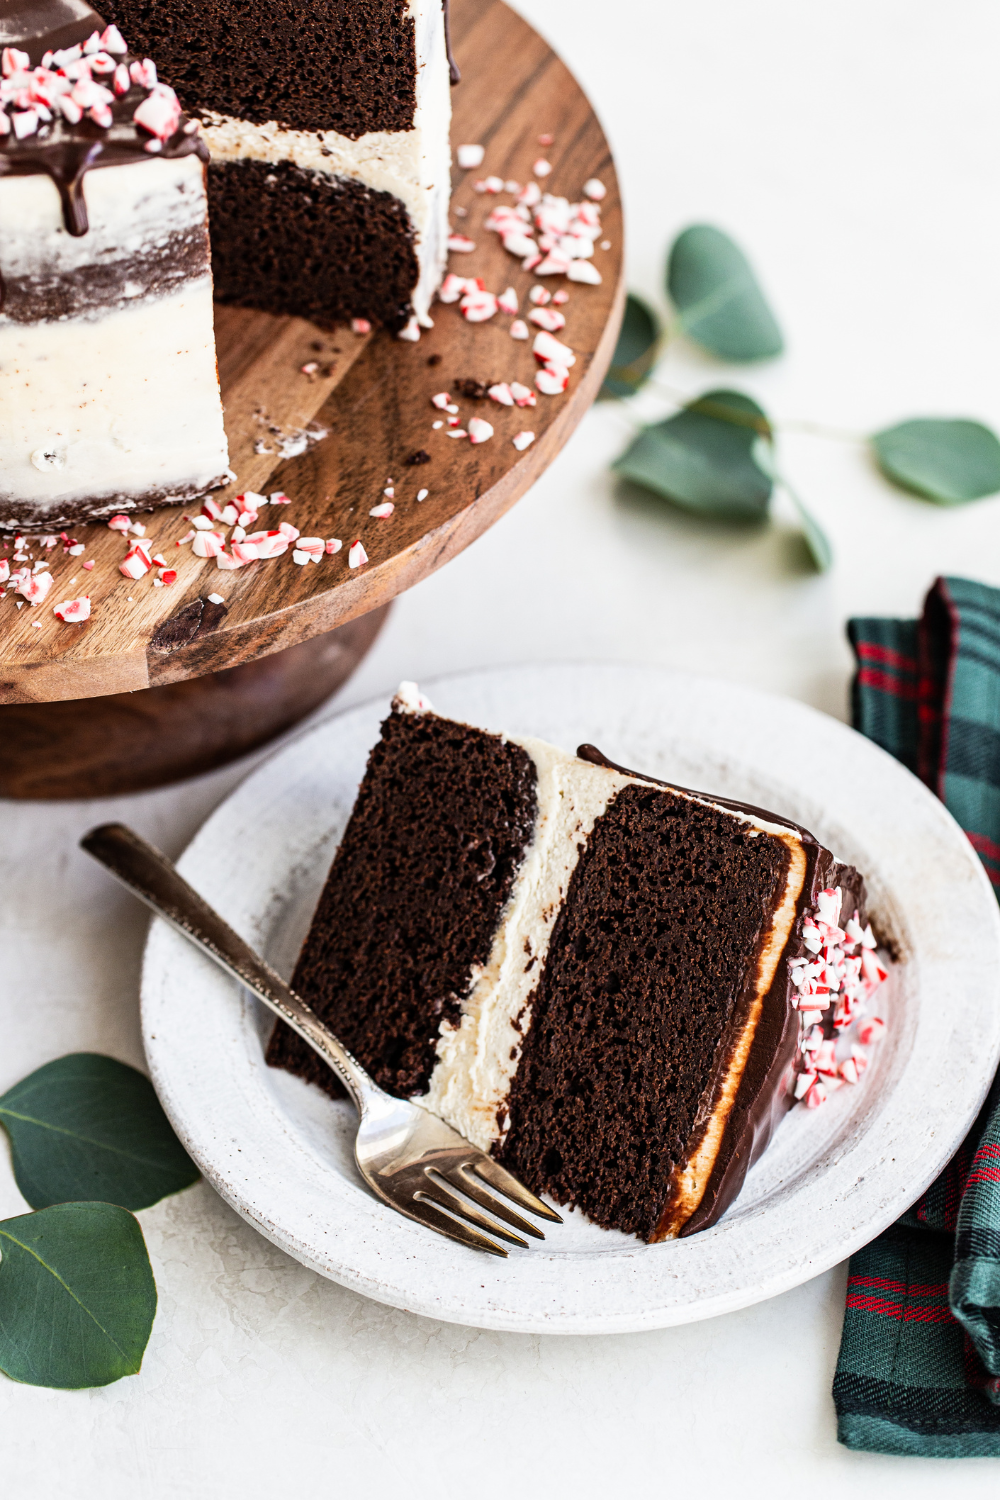 the whole Peppermint Chocolate Cake on a cake stand, with a slice of the cake on a plate, with a fork, ready to serve.